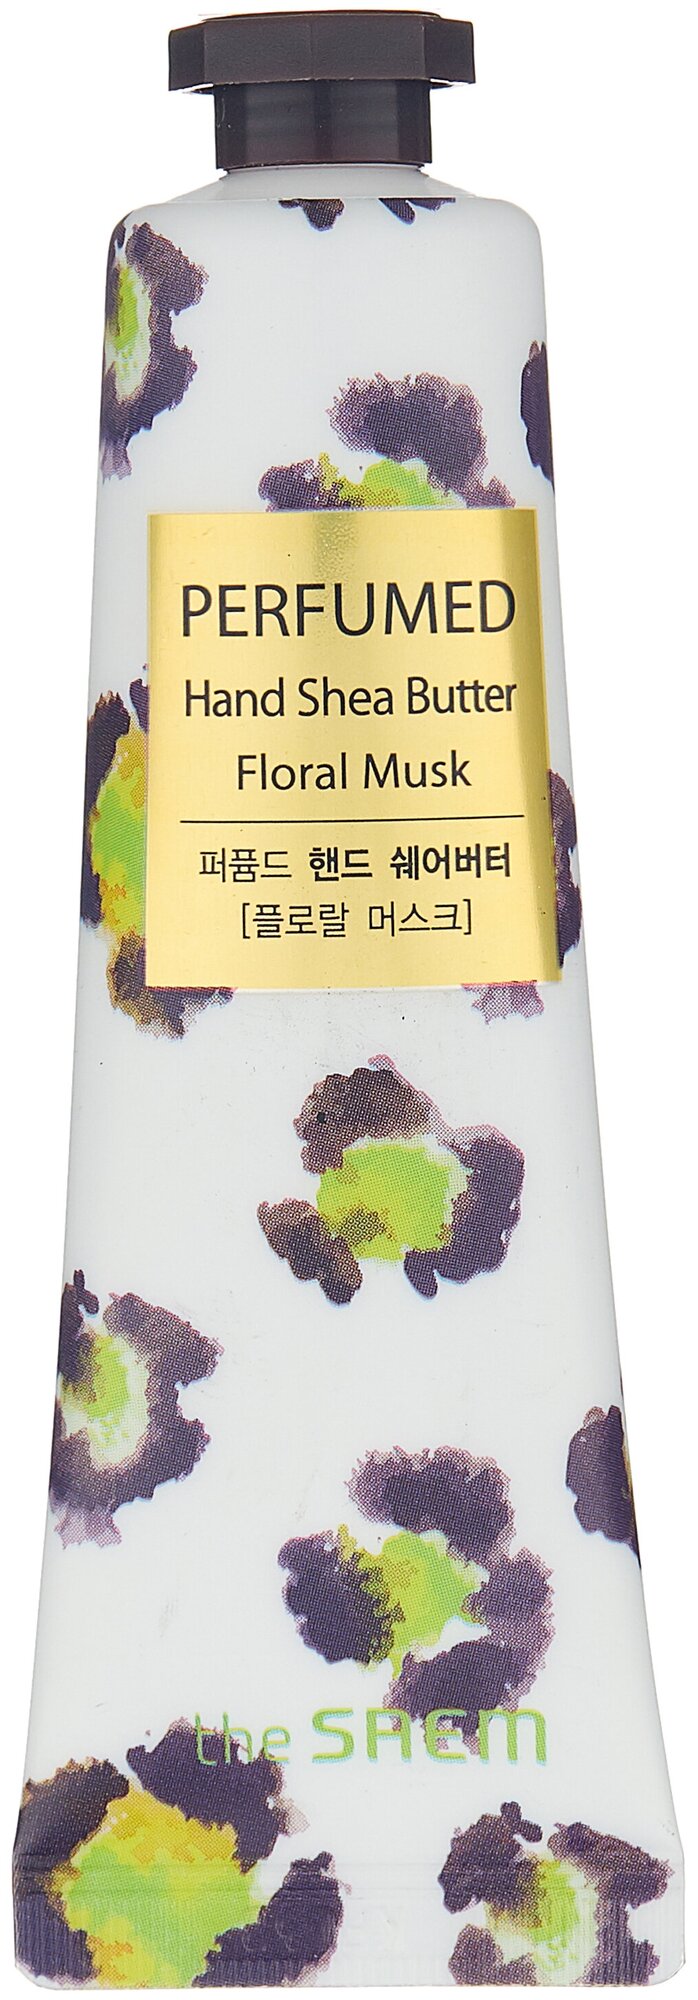 the SAEM Perfumed Hand Shea Butter - Floral Musk